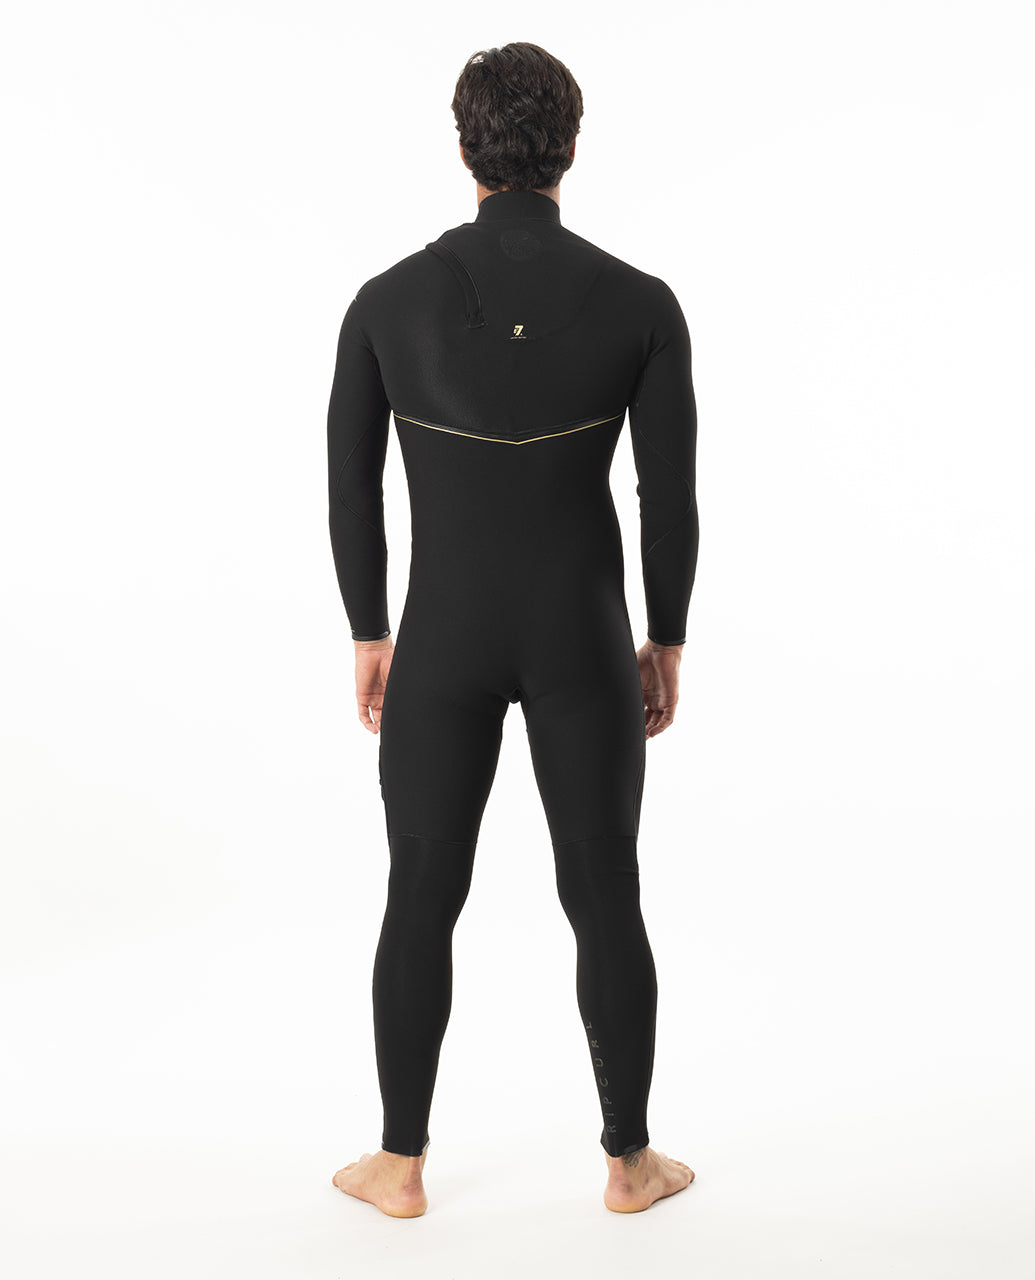 E7 Limited Edition E-Bomb 4/3mm Zip Free Wetsuit Steamer